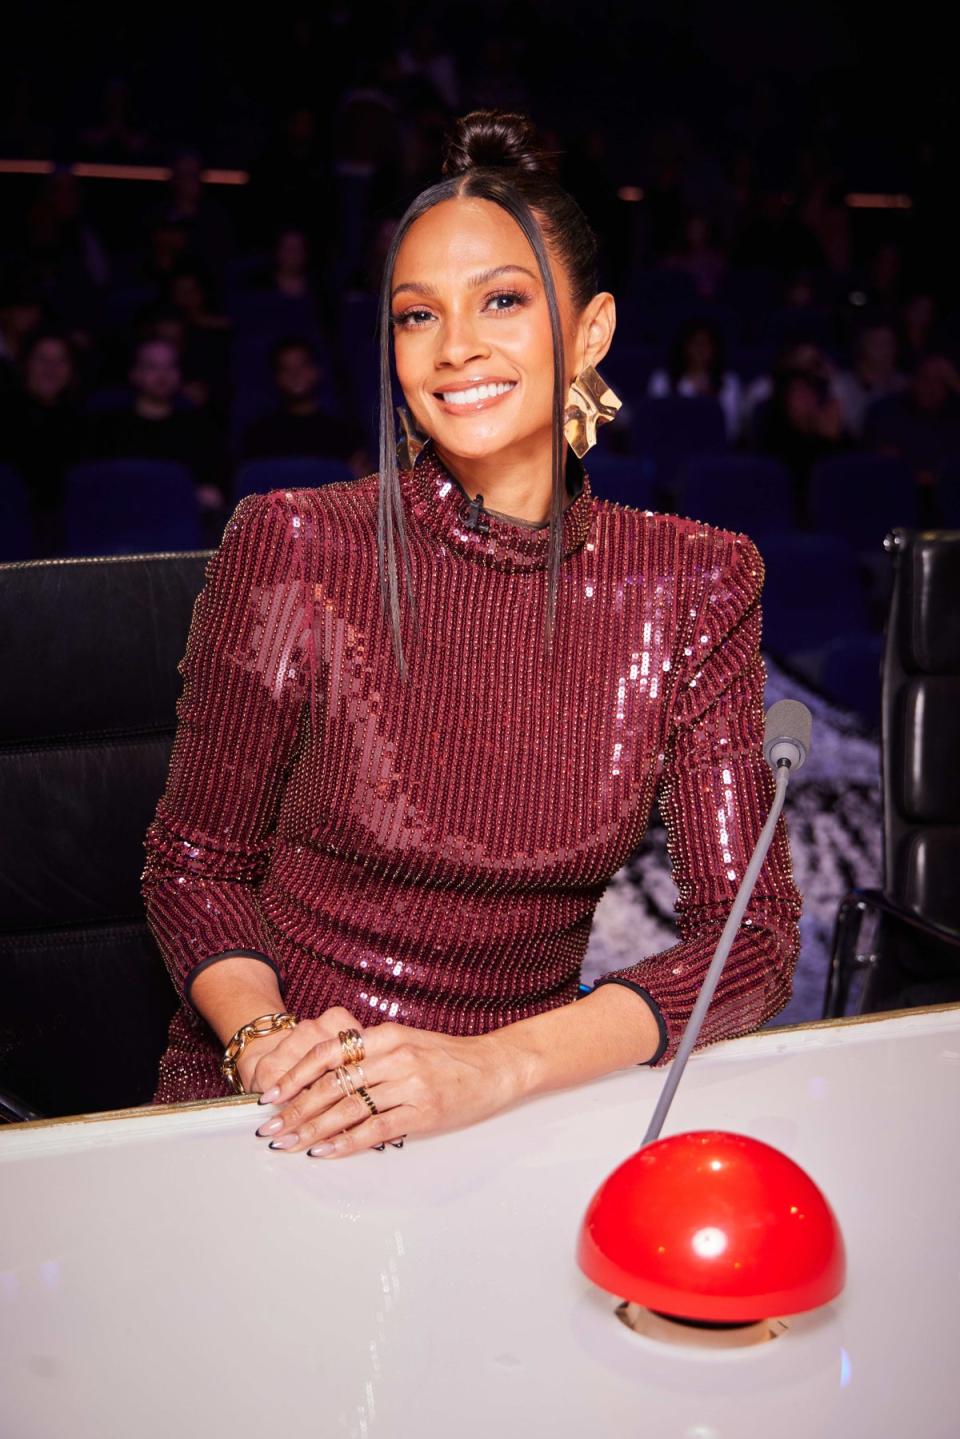 Alesha Dixon teased she thought audiences were going to ‘love’ the show (ITV)